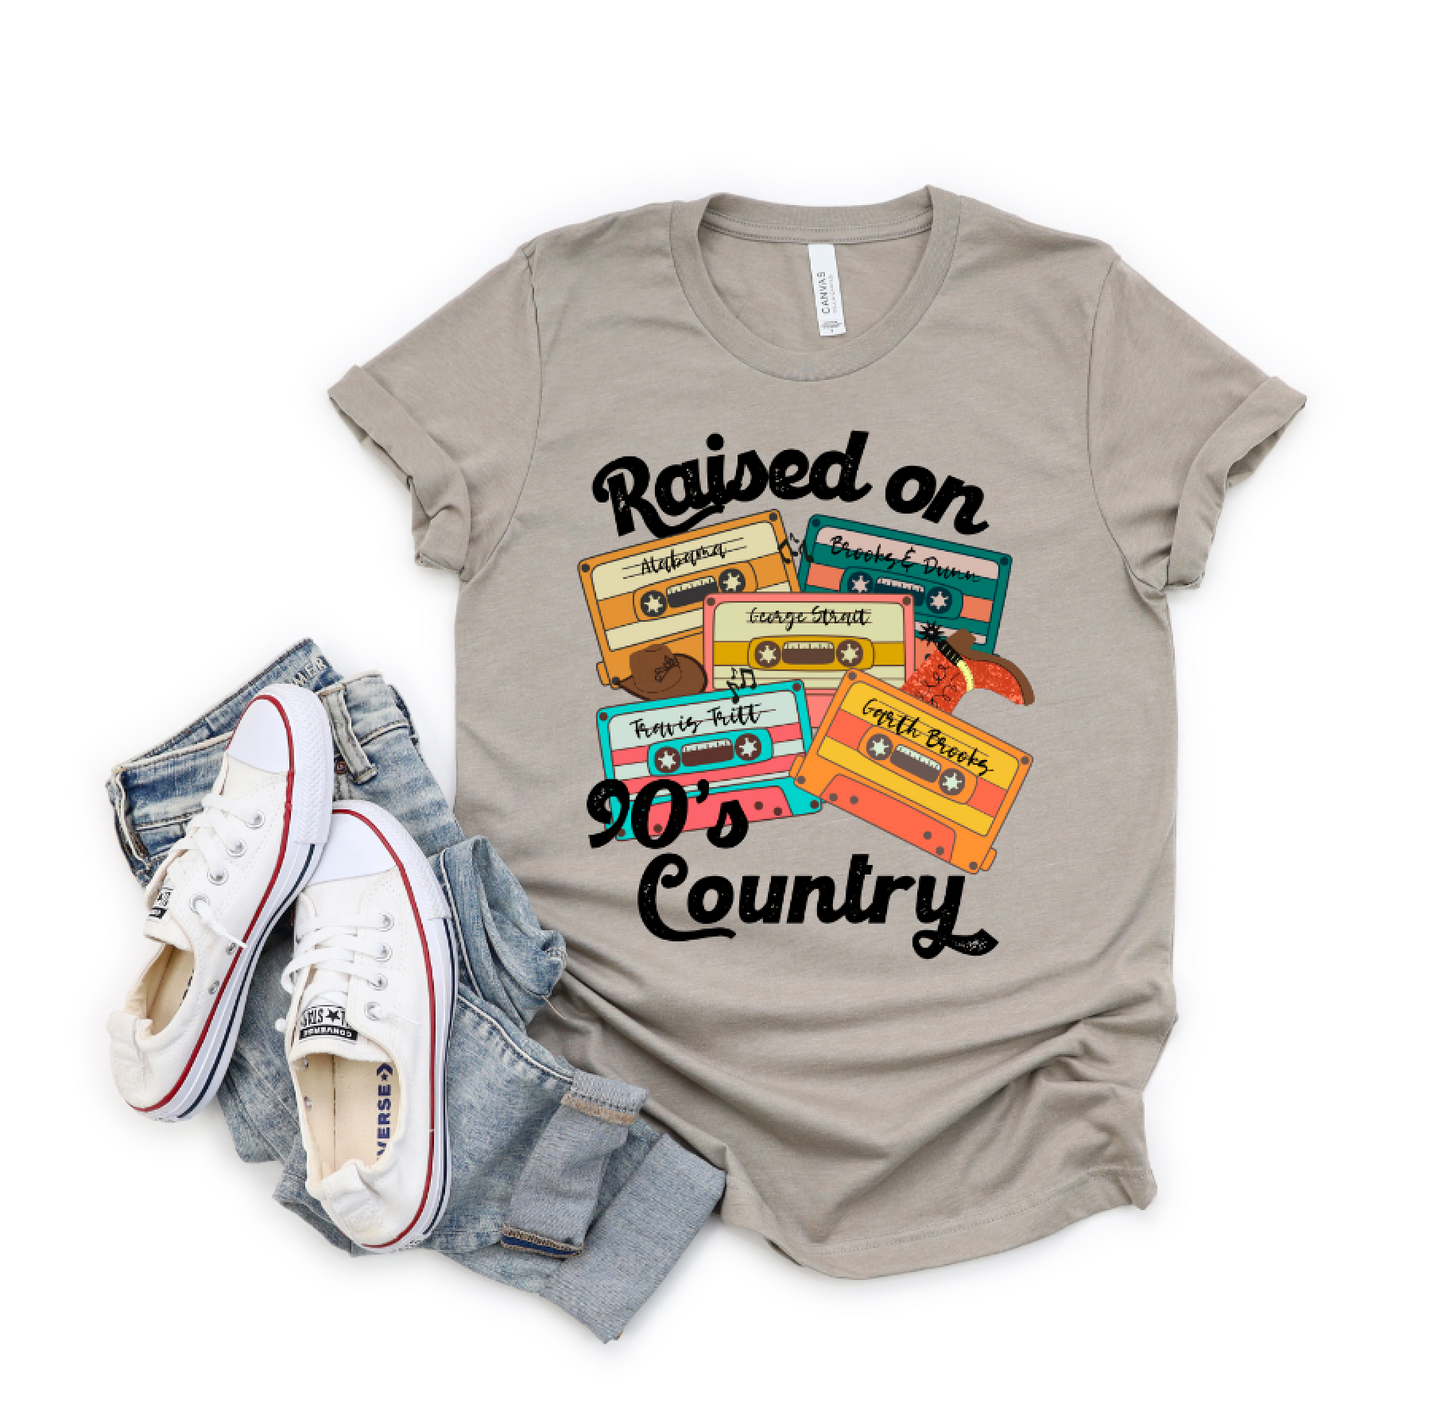 Raised on 90's Country || Mixed Tapes Printed T-Shirt